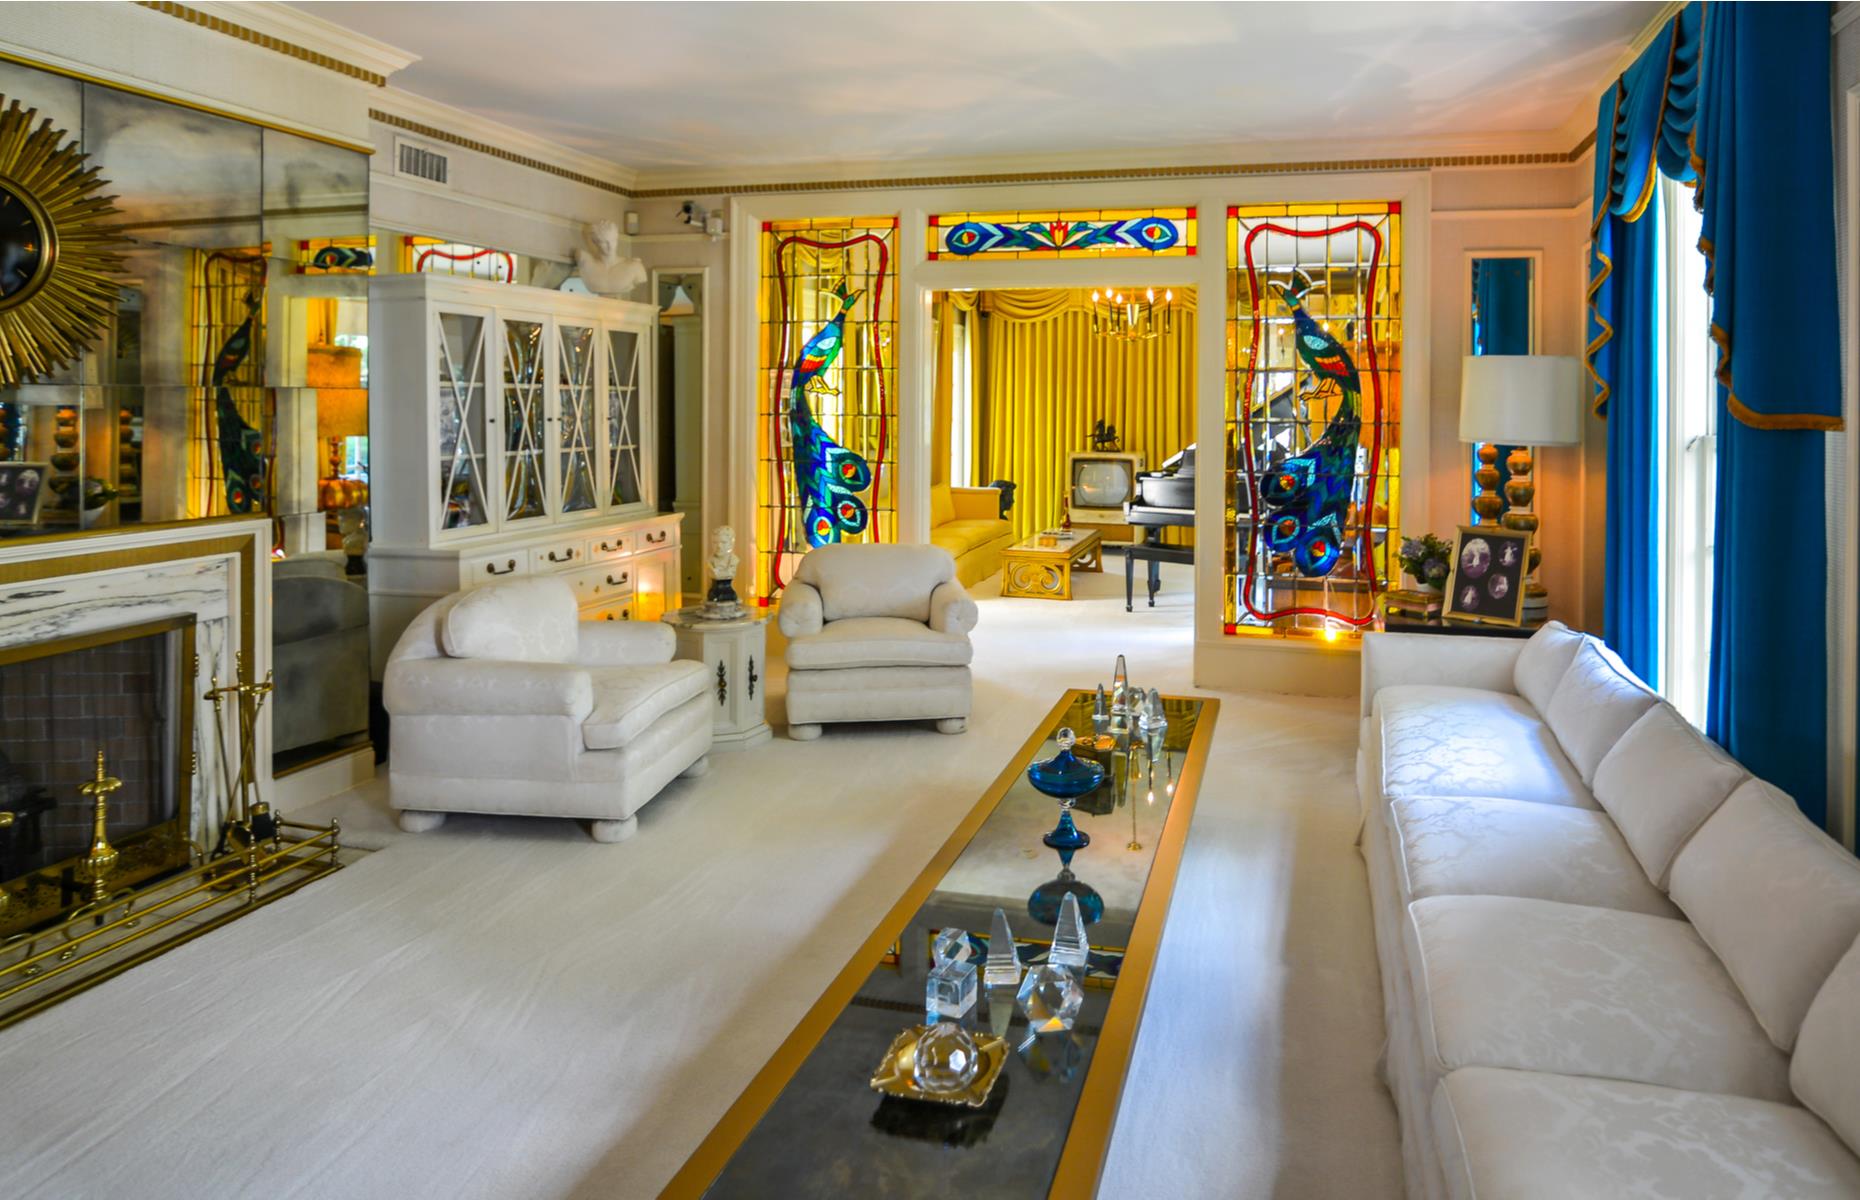 <p>Whether you're a long-time fan of the King or not, <a href="https://www.graceland.com">the home of late rock 'n' roll legend Elvis Presley</a> is a joy to explore. The mansion is as eccentric as the man himself with a bright yellow TV room, plush living area and the famous Jungle Room with its dark wood and grass-green carpets. You can also pay your respects at Elvis's gravesite in the peaceful meditation garden. Across the road, there are a whole host of exhibits from the Presley Motors Automobile Museum to displays on Presley's life and family.</p>